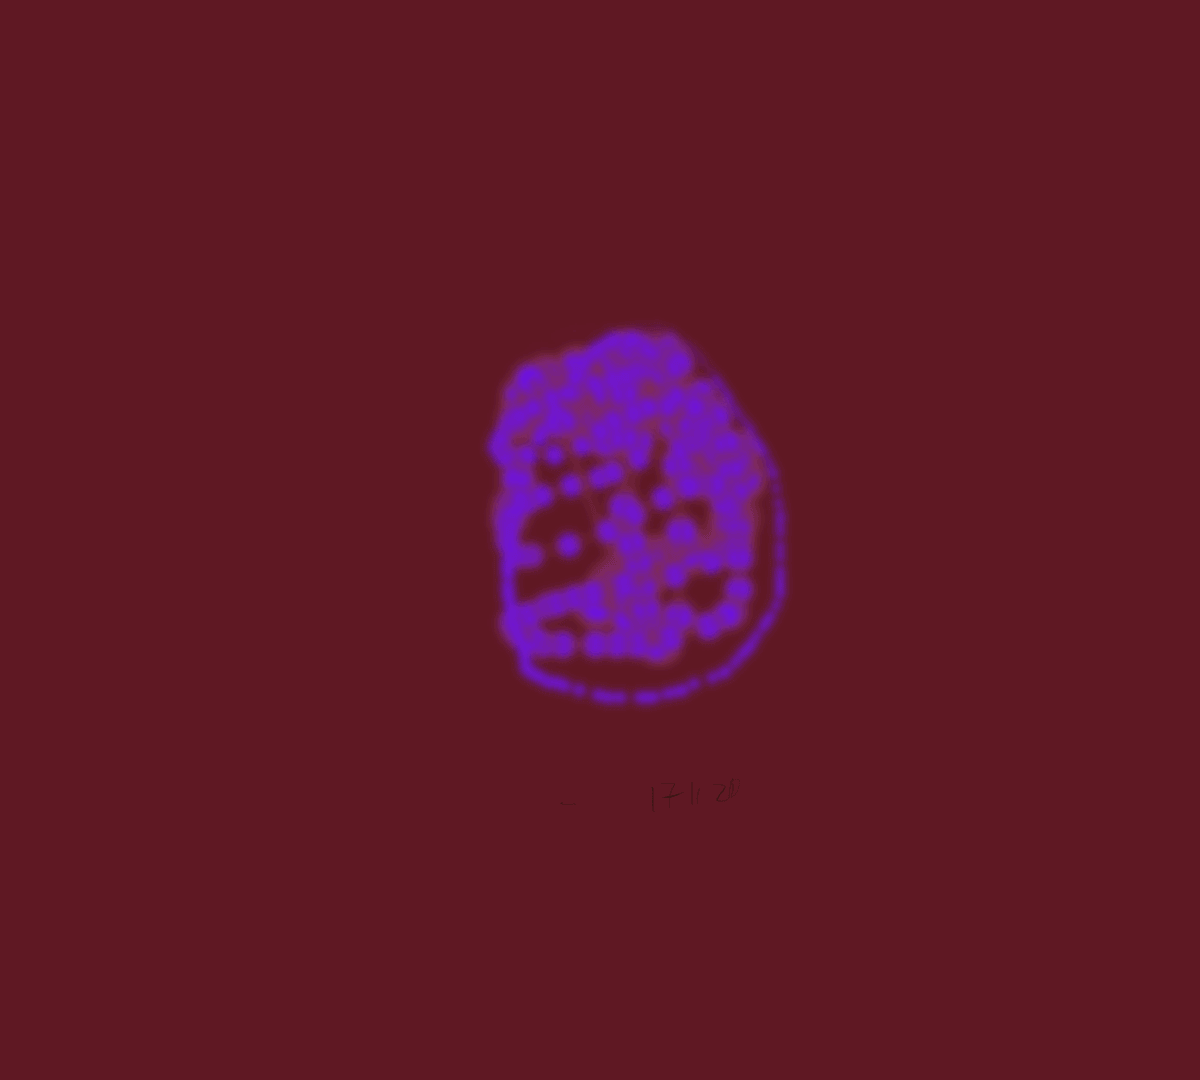 Thumb browser painting in purple and sherbert that looks like phone screen grease on a scarlet background.